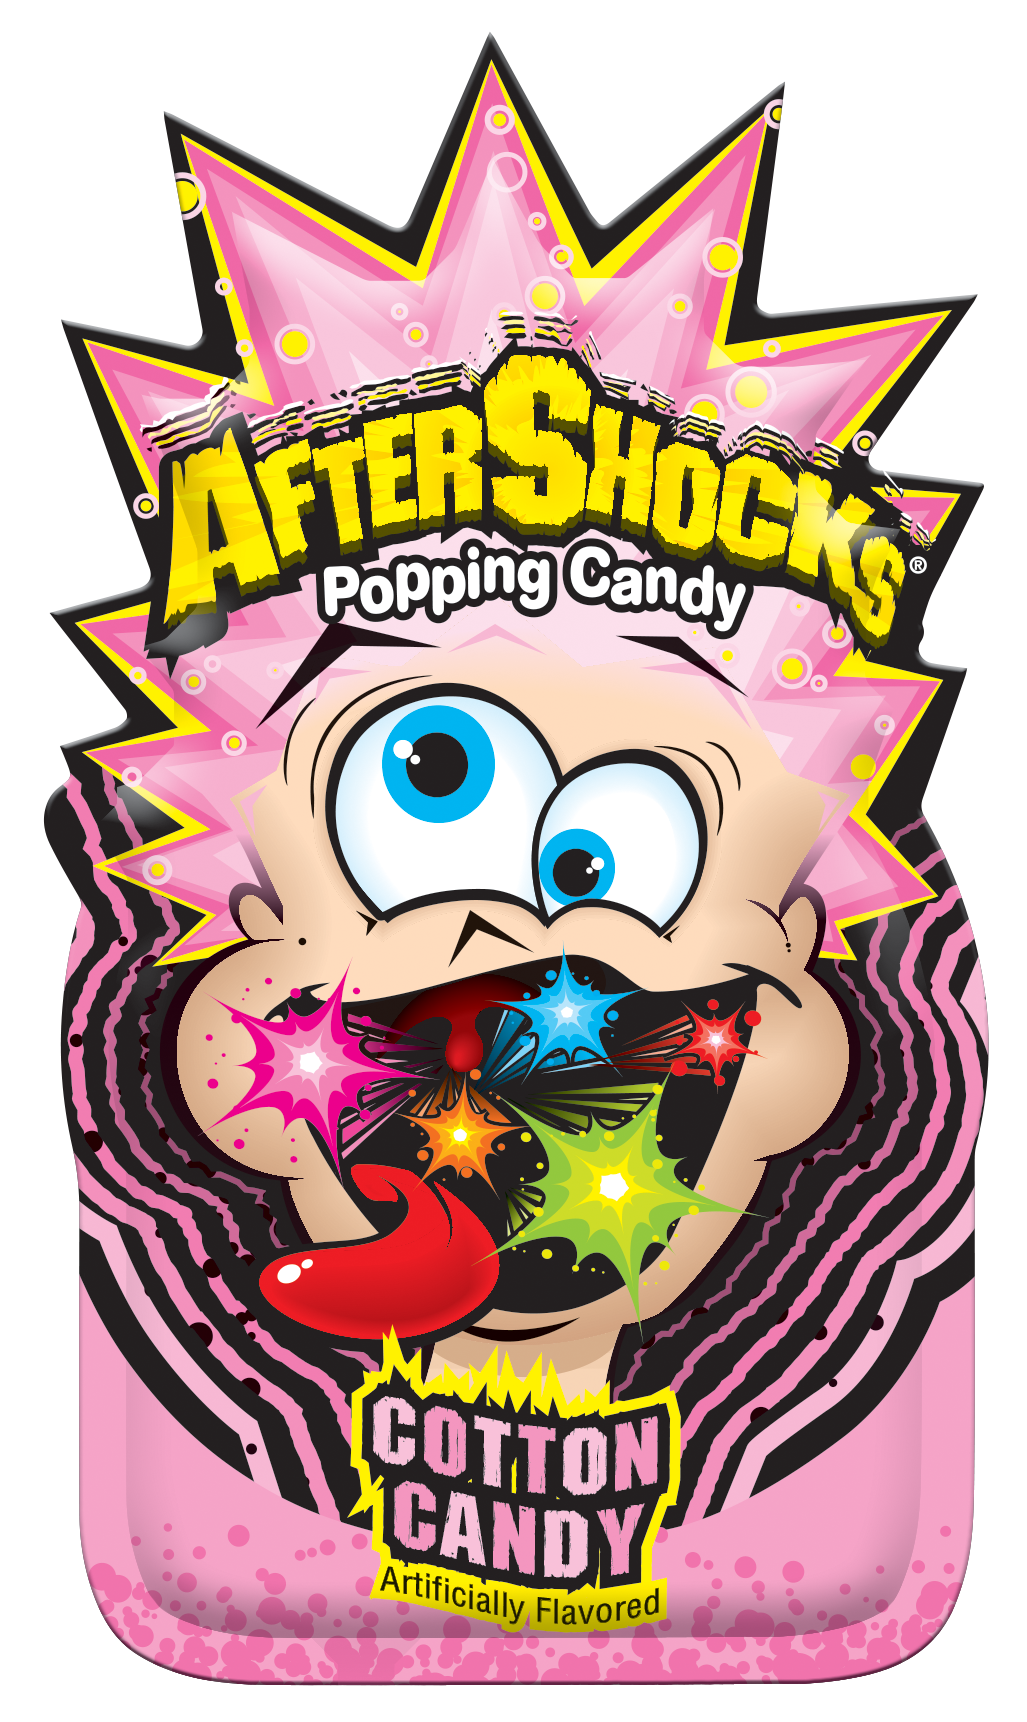 Aftershocks Popping Candy Cotton Candy-0.33 oz.-24/Box-8/Case